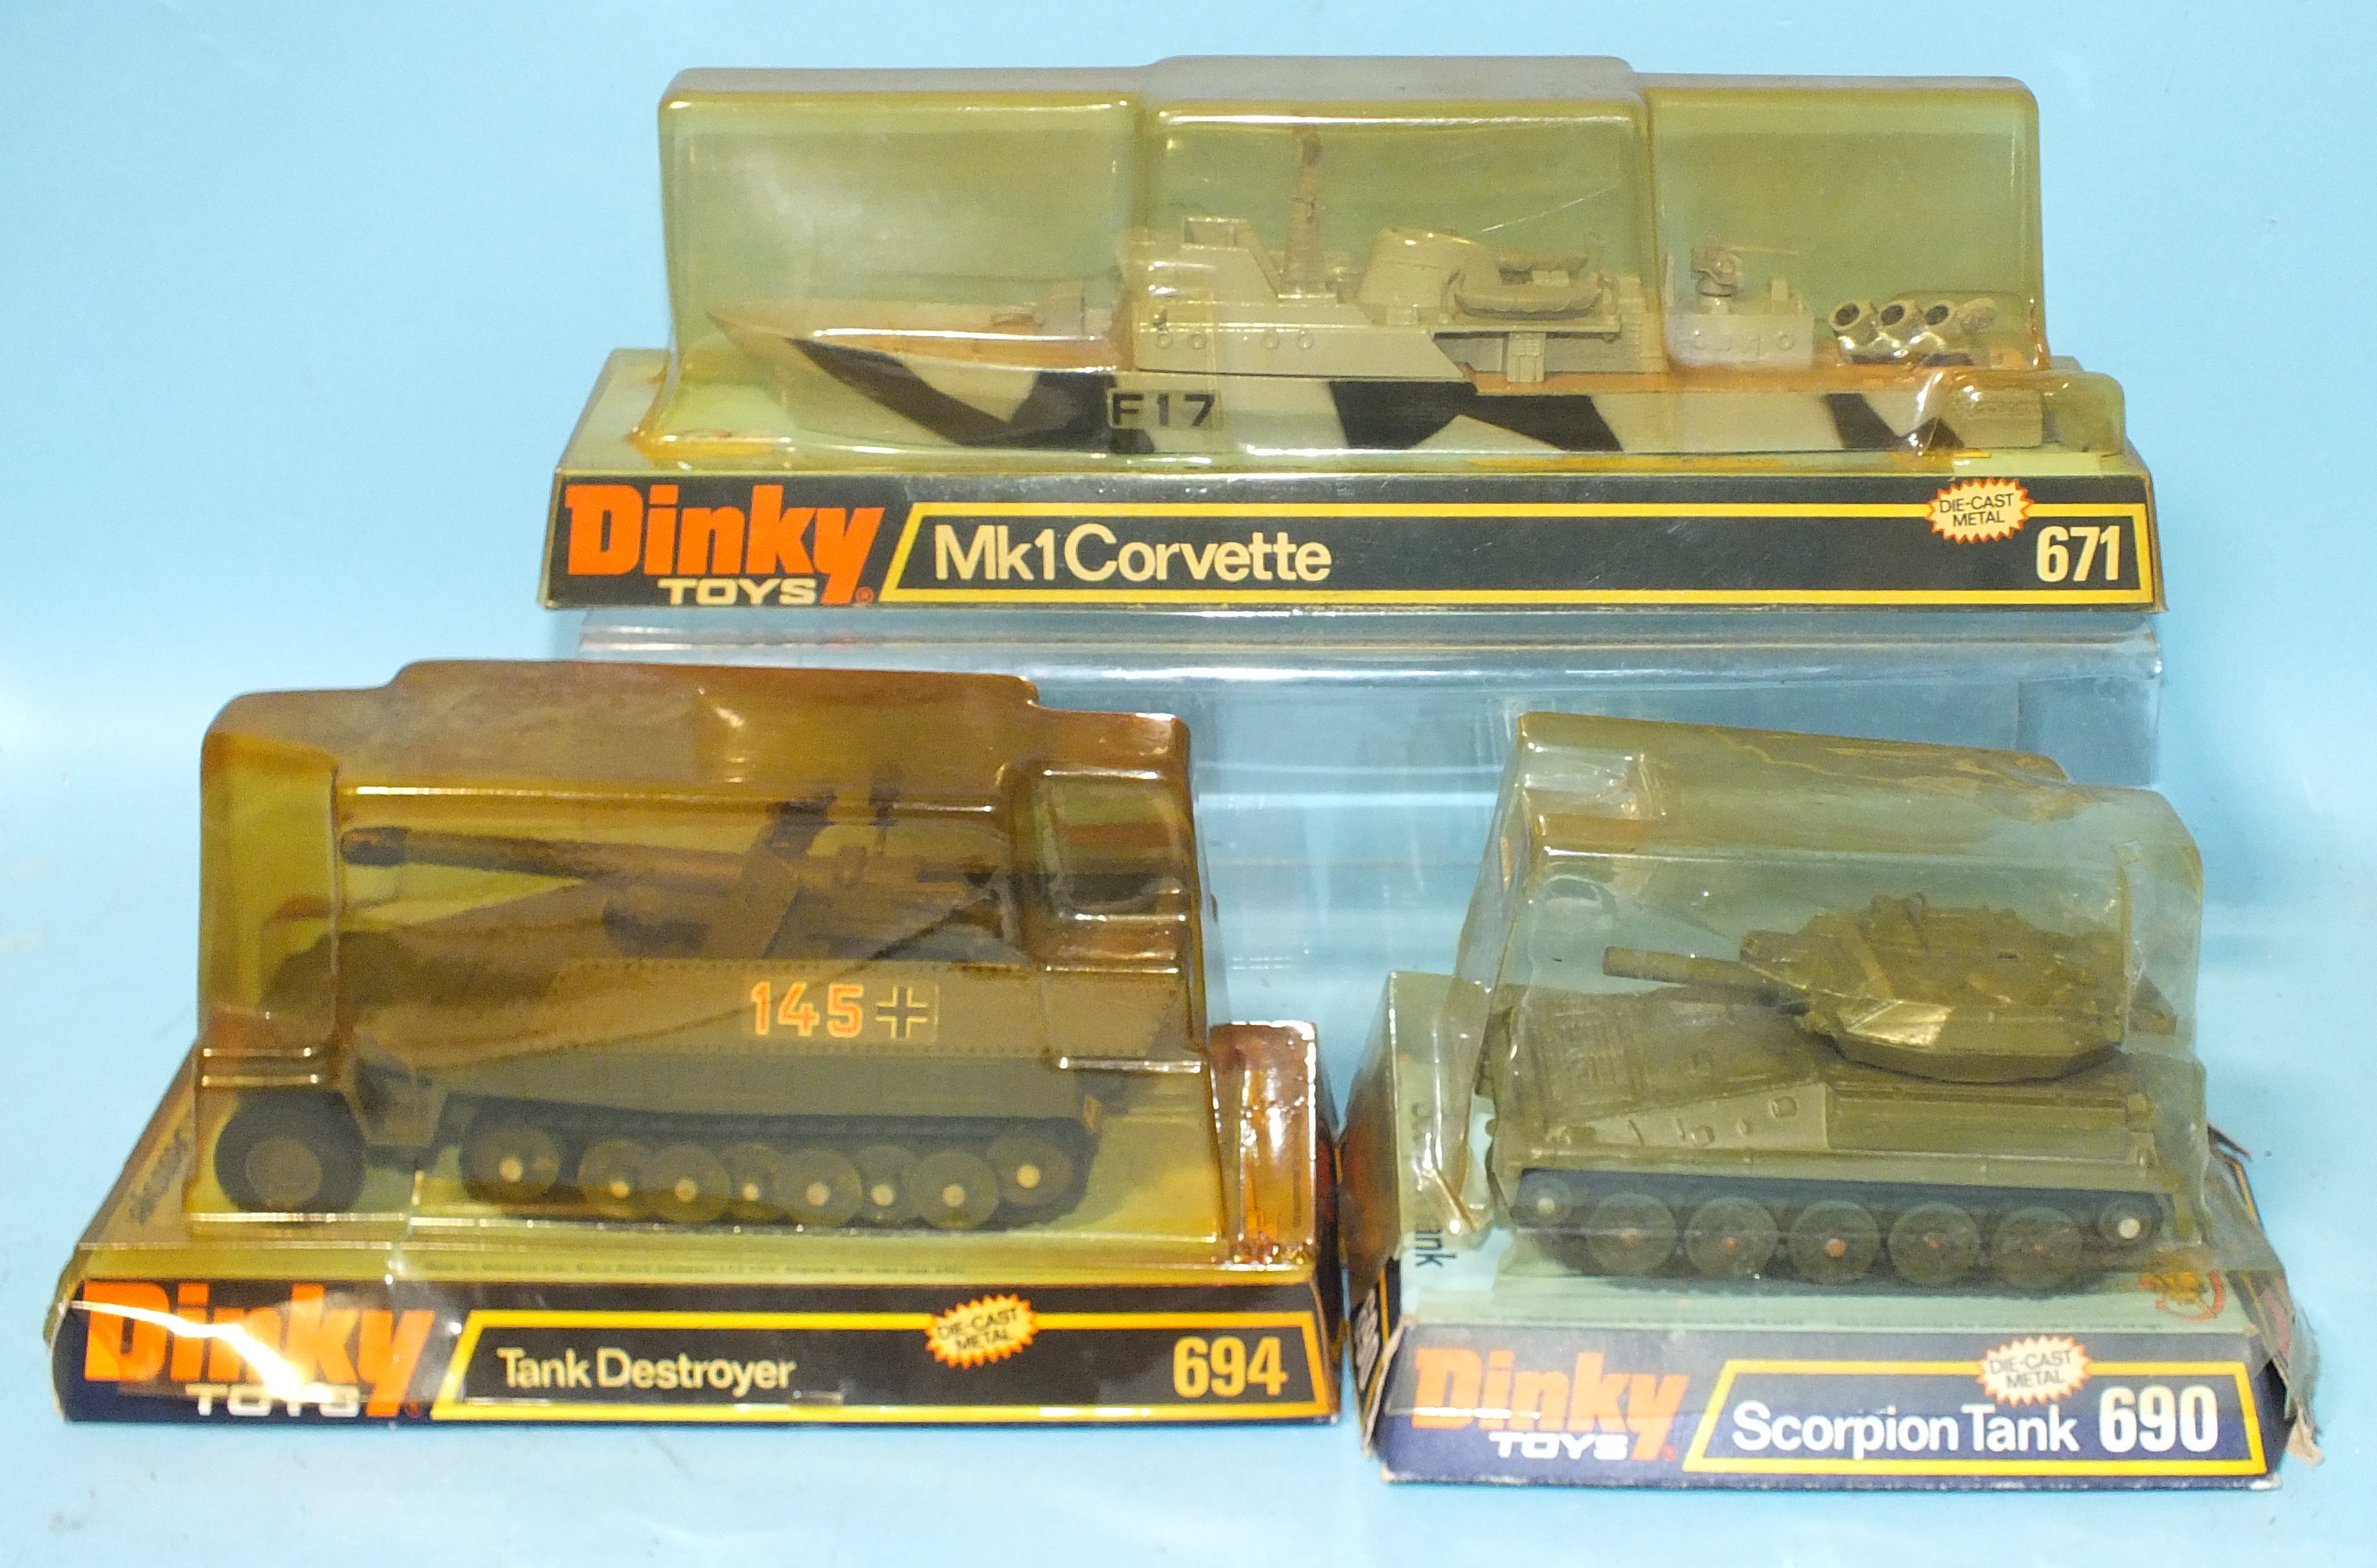 Dinky Toys, 671 Mk1 Corvette, 690 Scorpion Tank and 694 Tank Destroyer, all in bubble packaging.